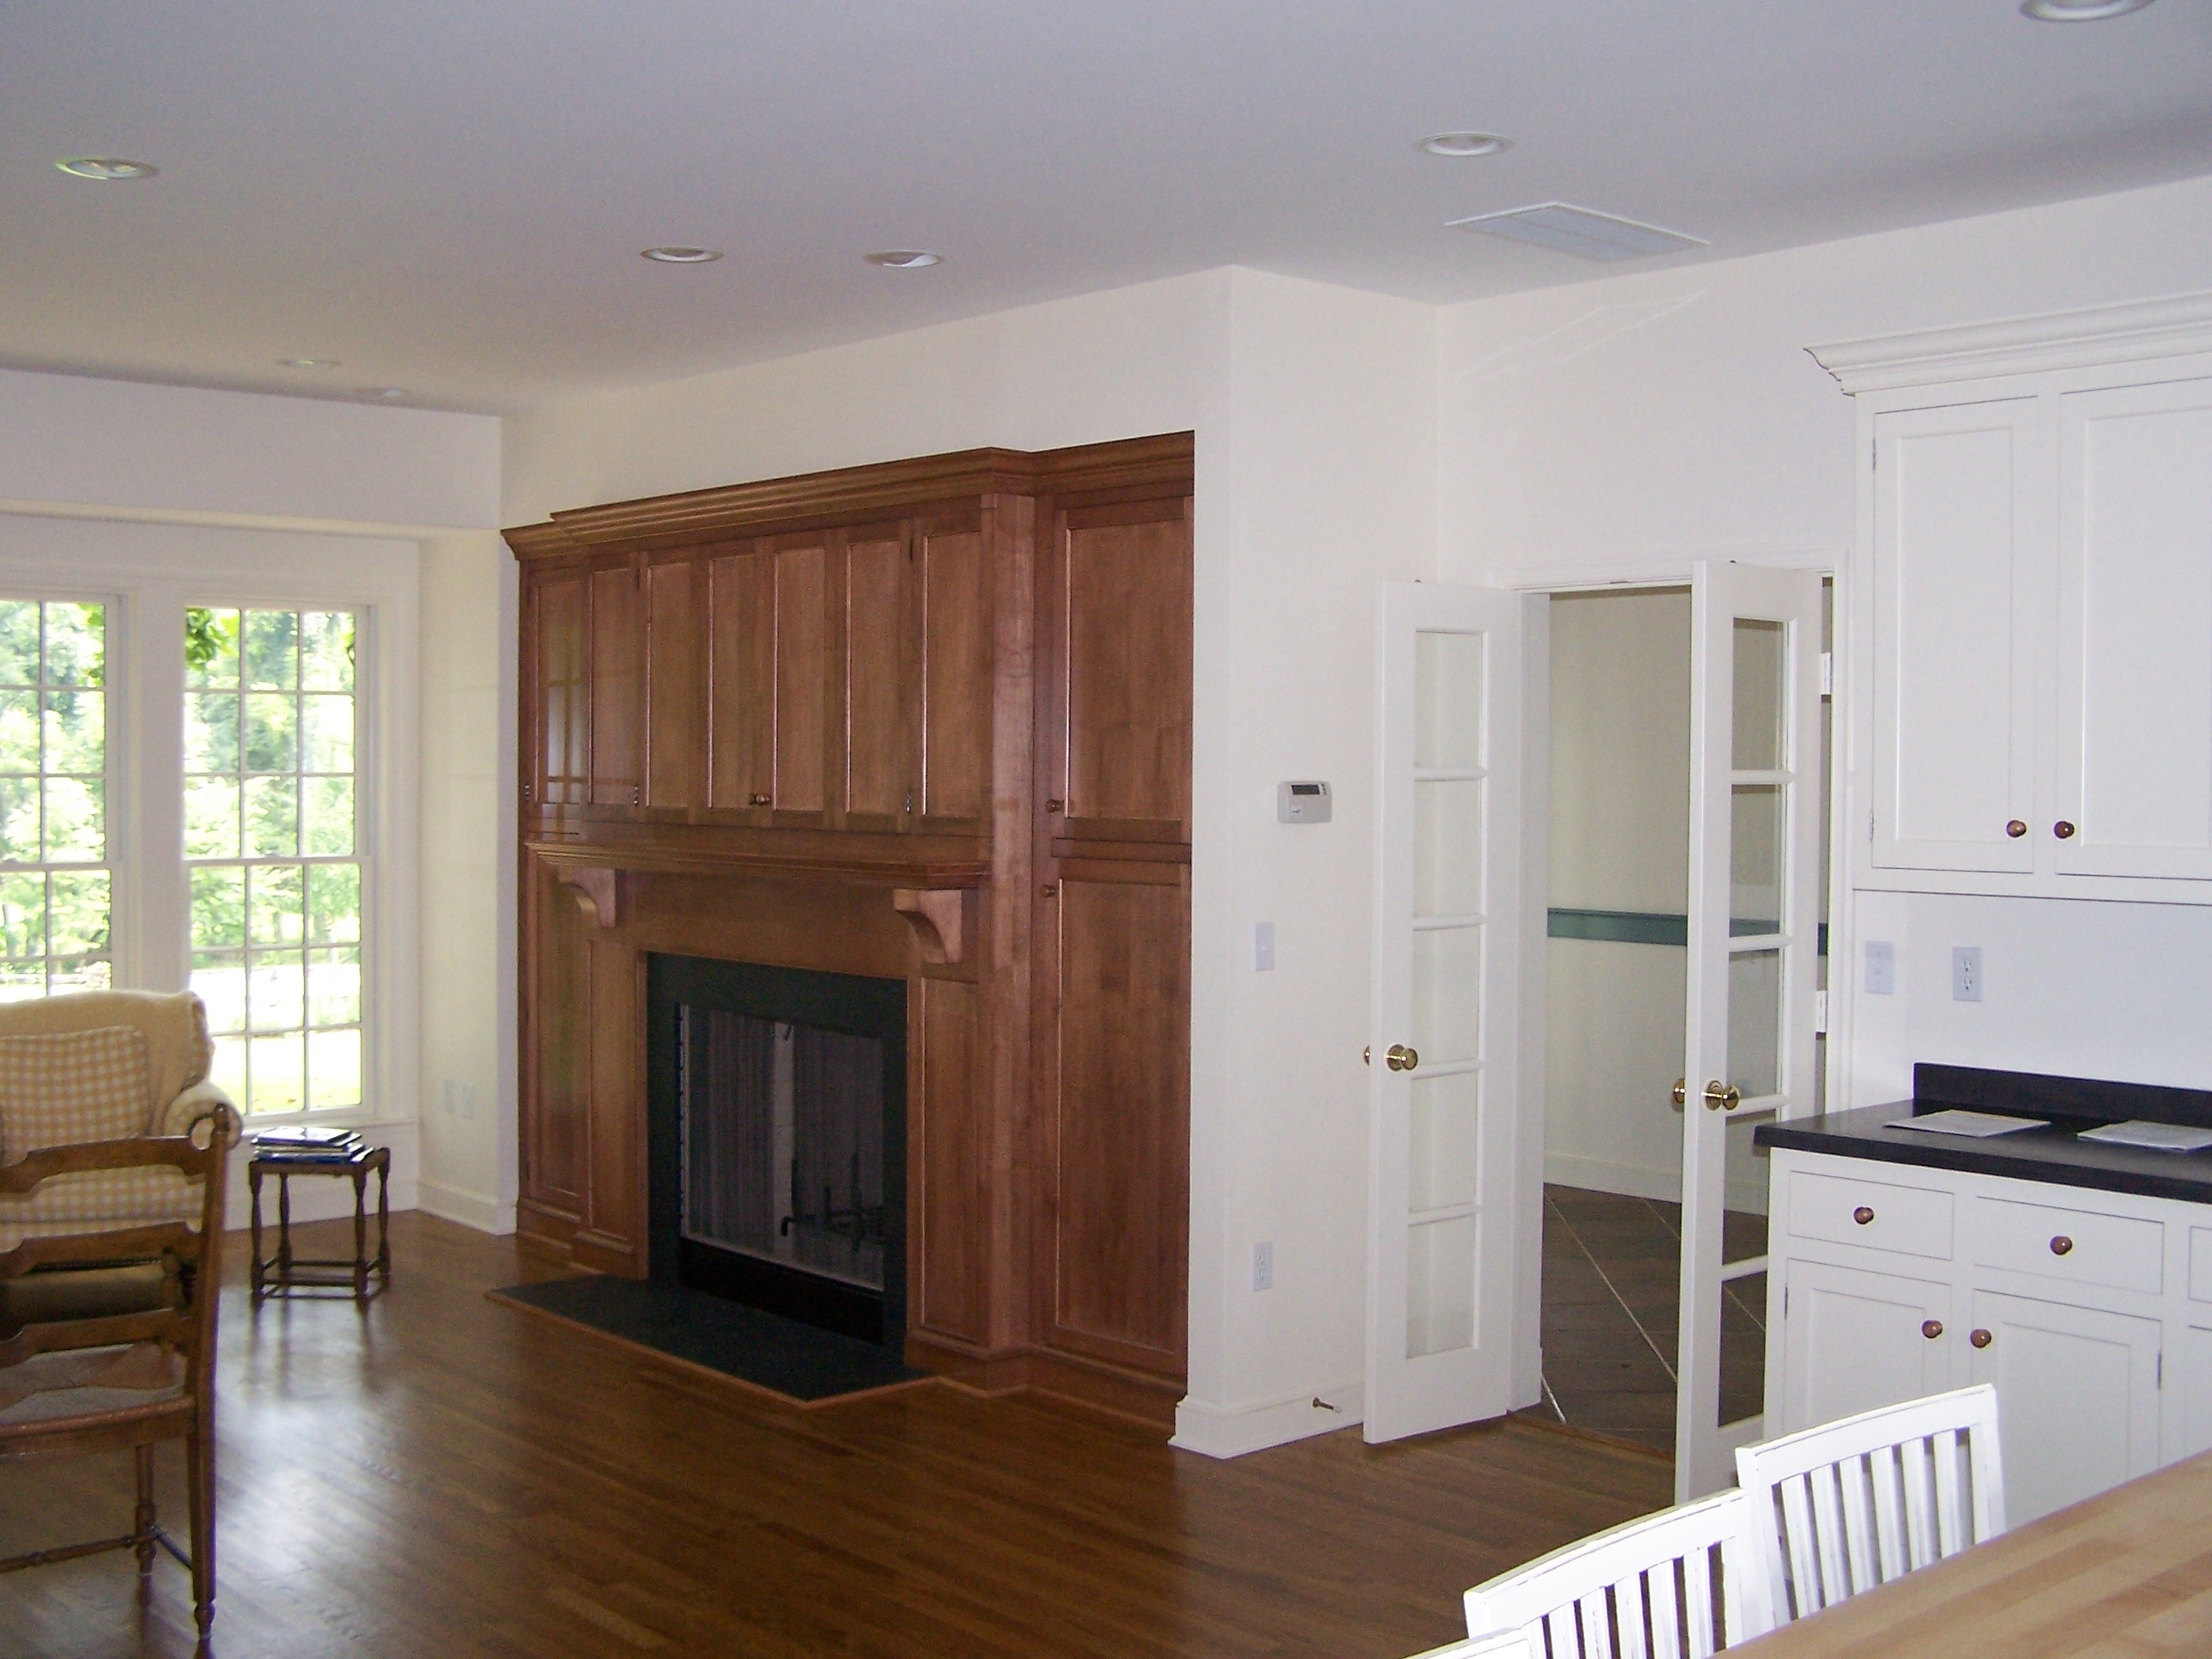 addition, remodel, and renovation after B